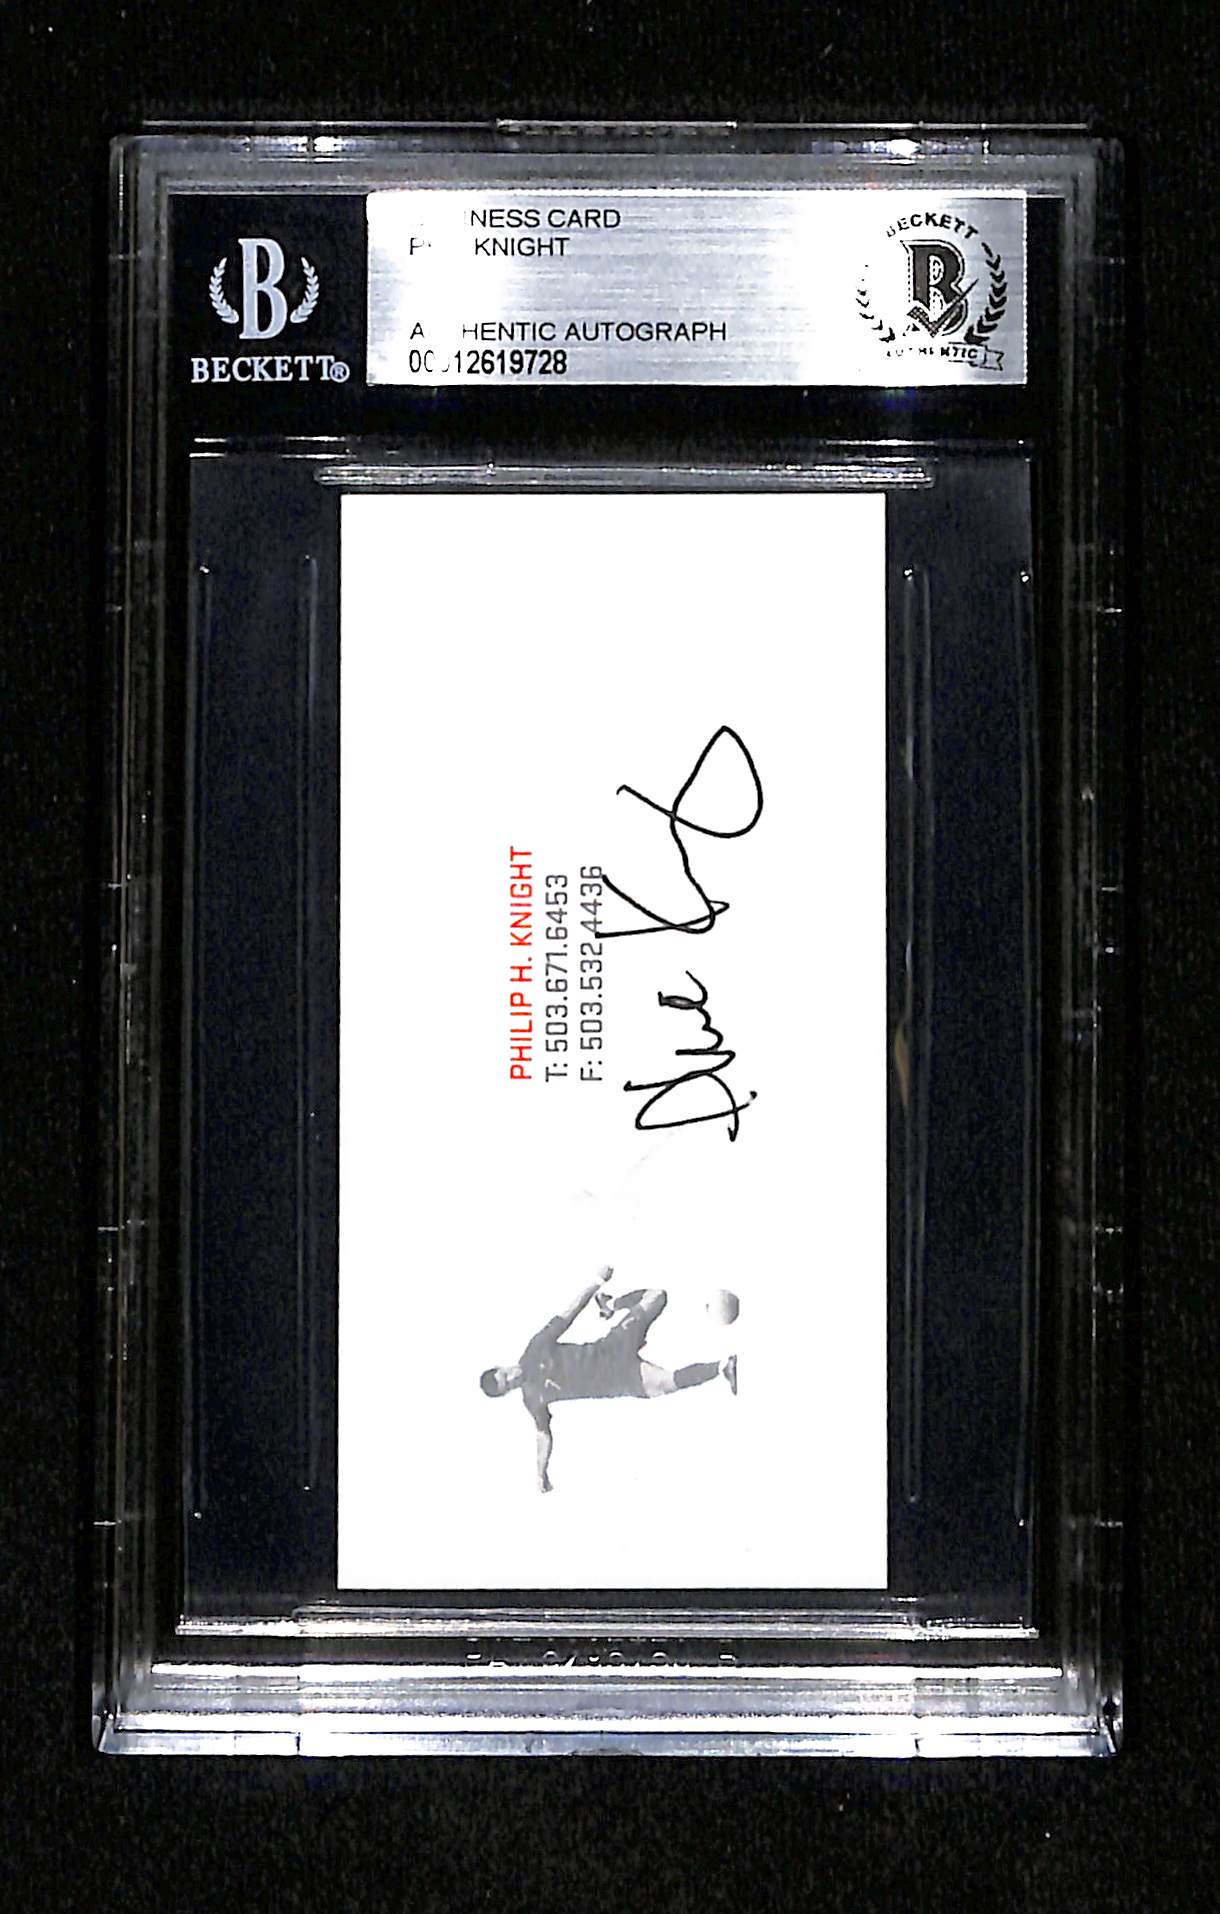 Phil Knight Business Card - Authentic Autograph - Beckett